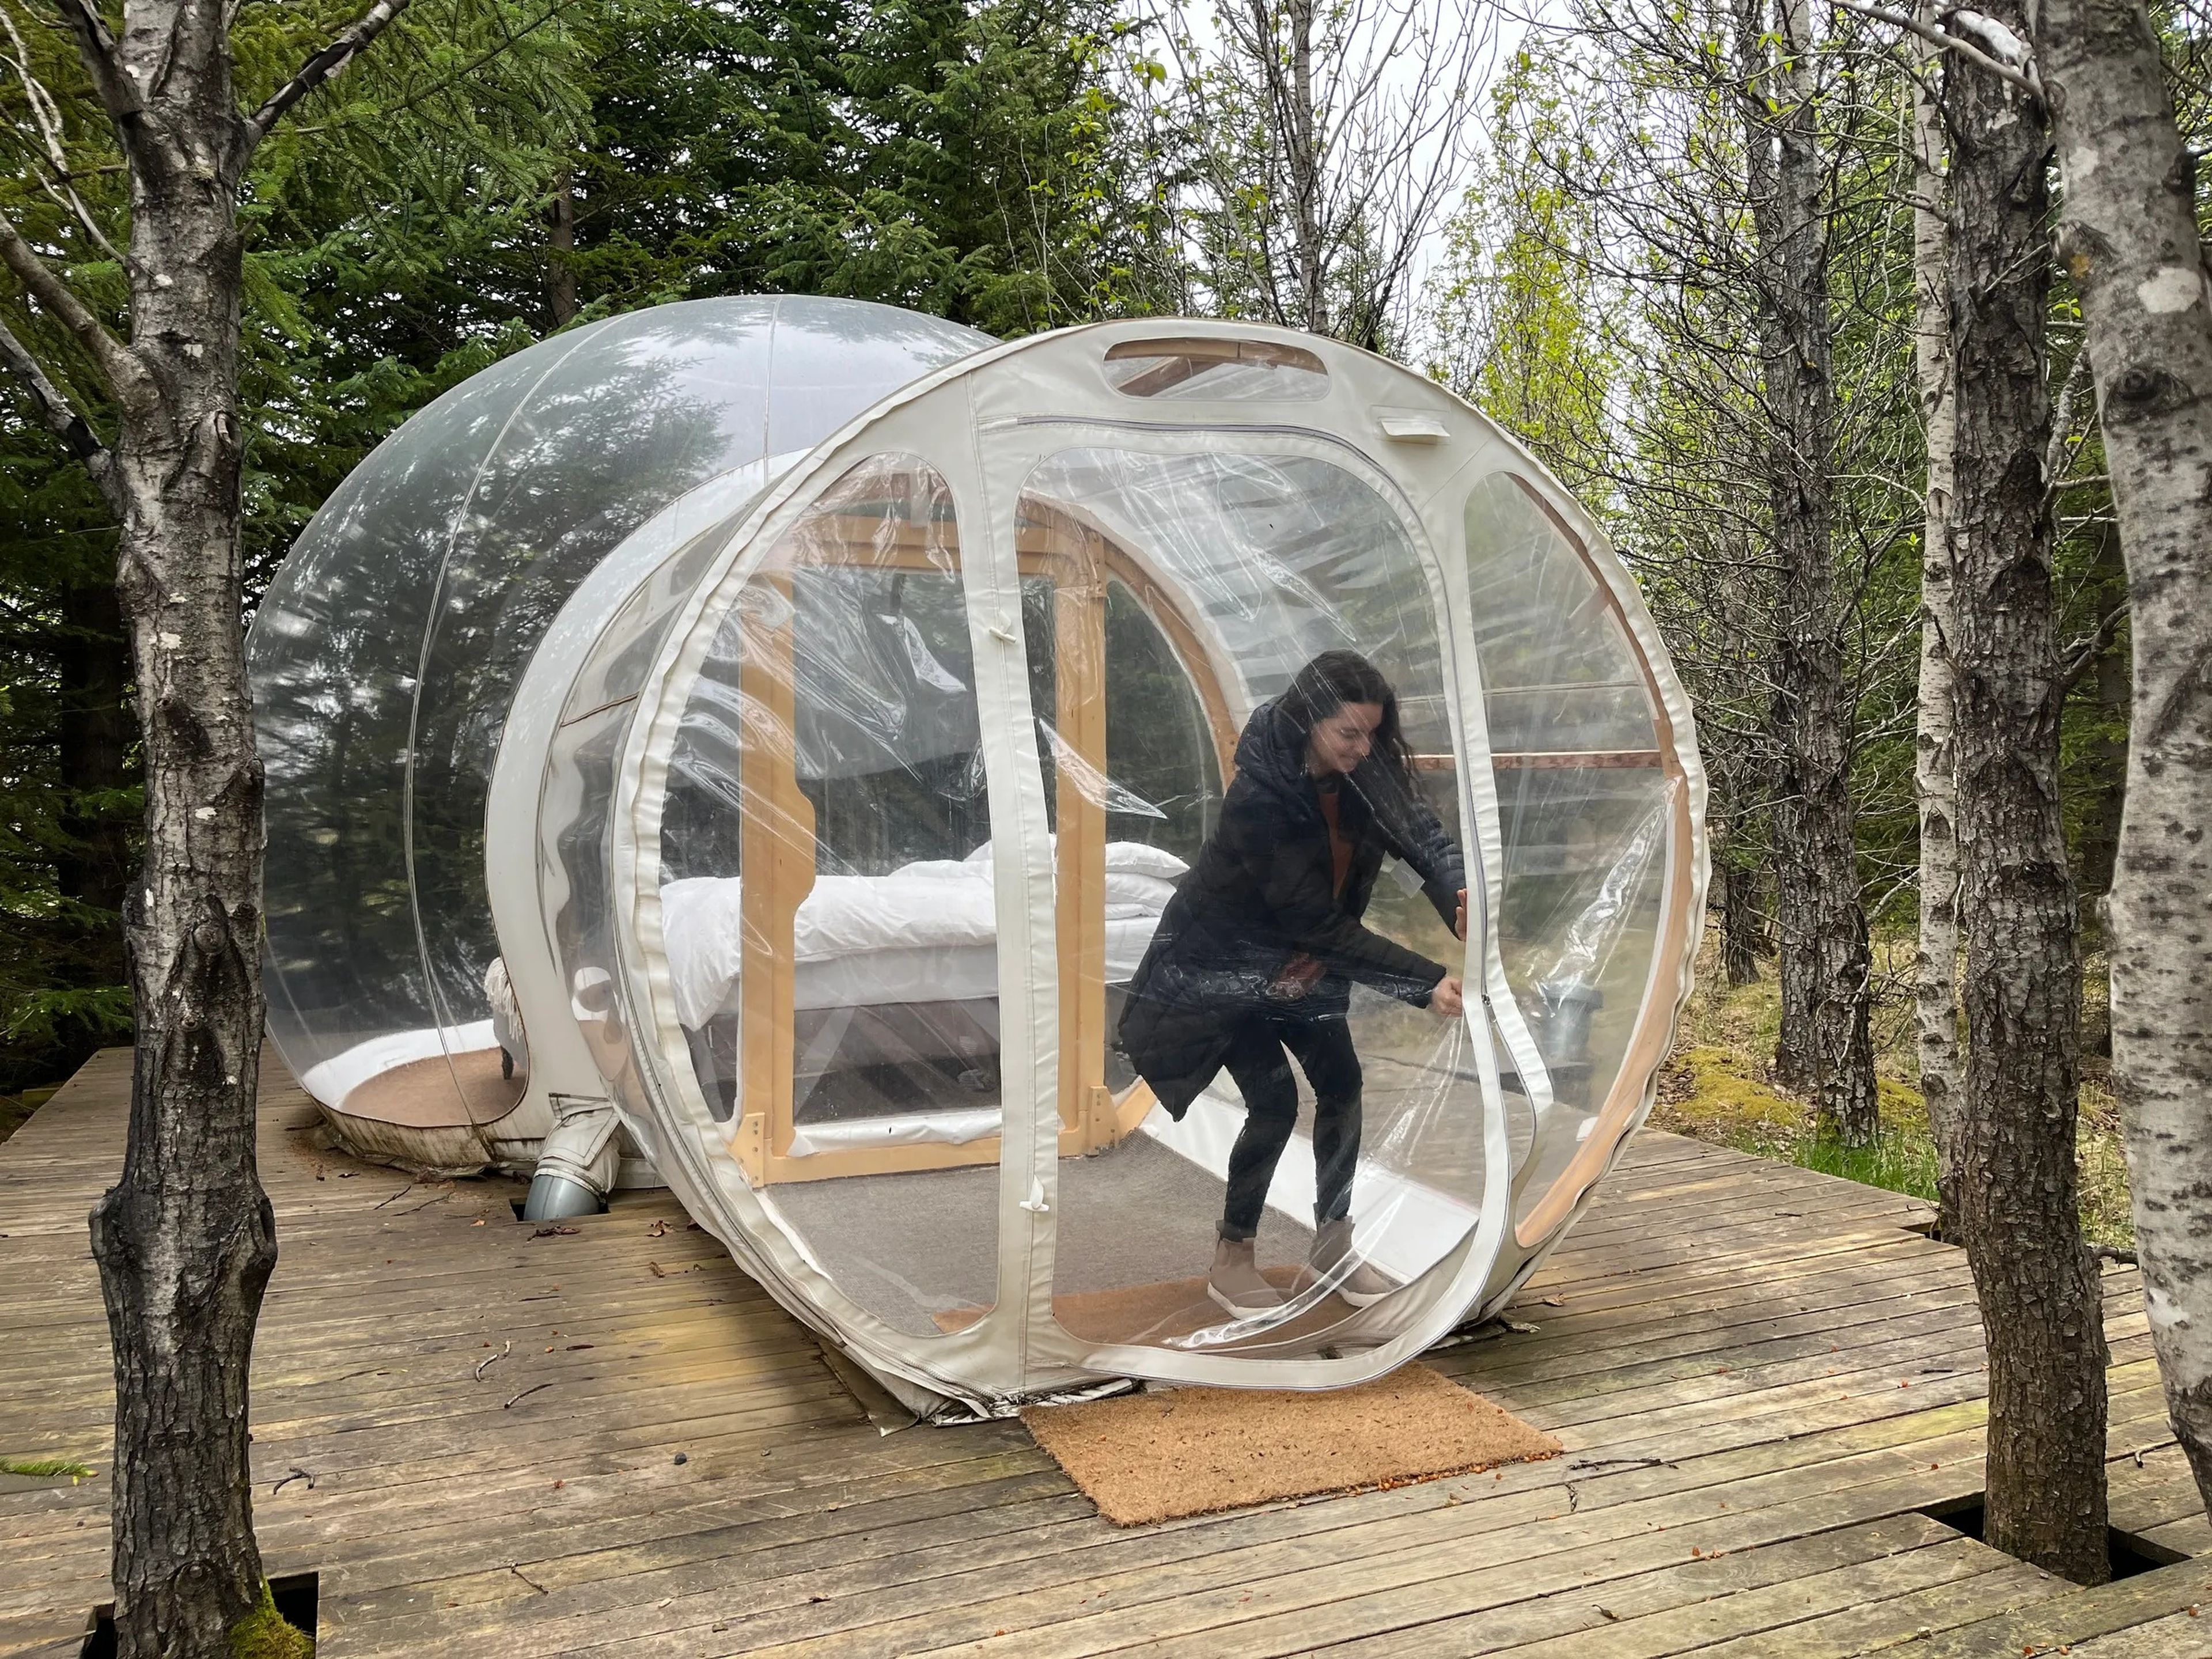 Zipping up a bubble at the Bubble Hotel in Iceland.